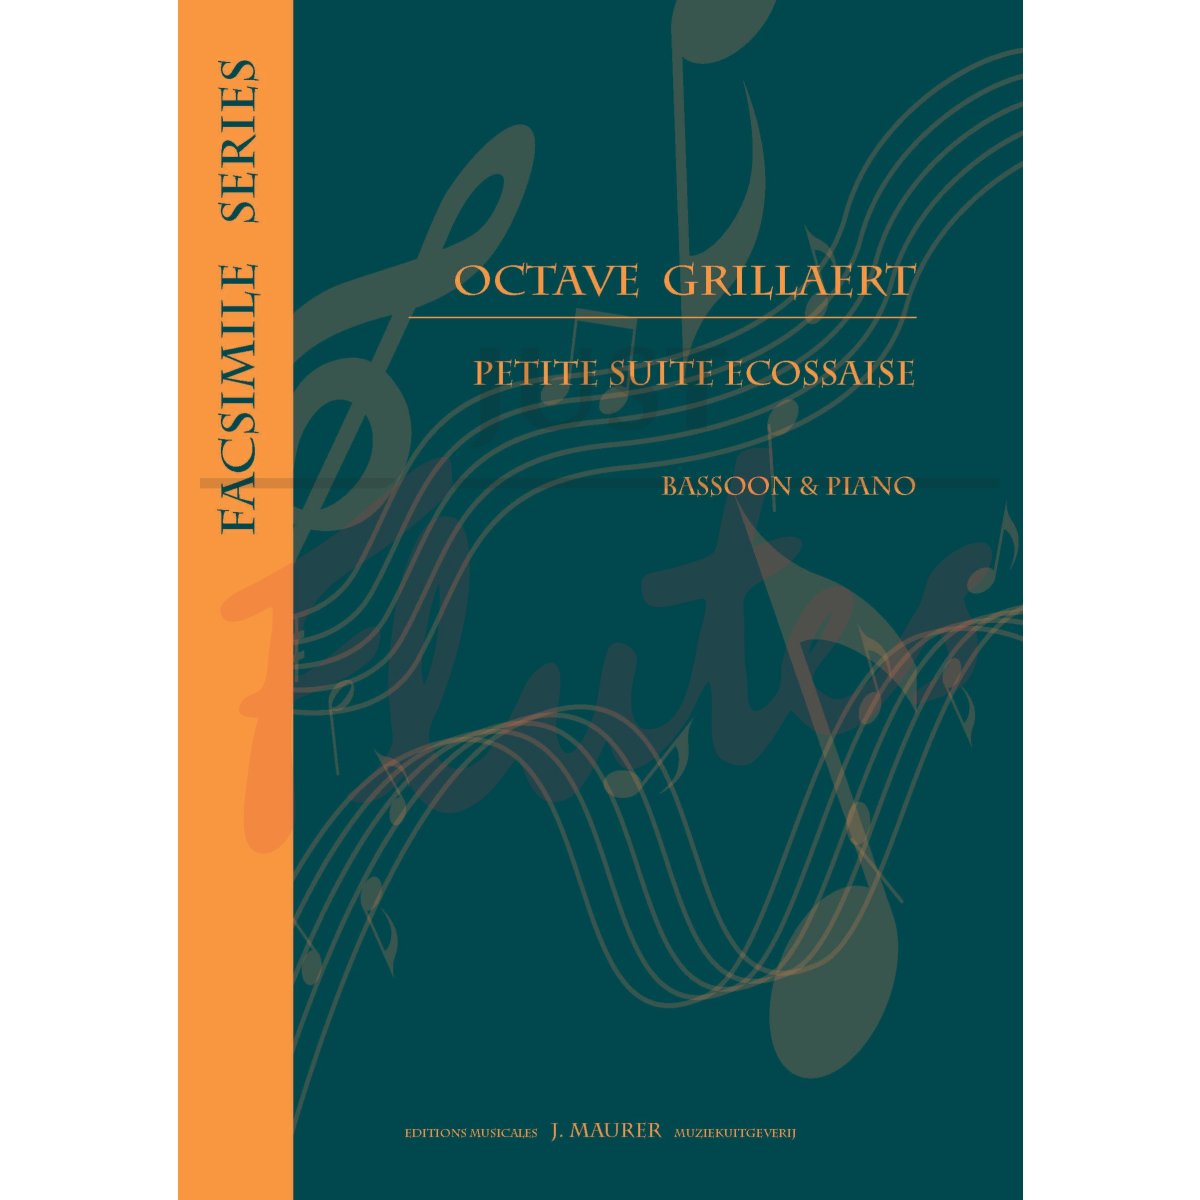 Petite Suite Ecossaise for Bassoon and Piano